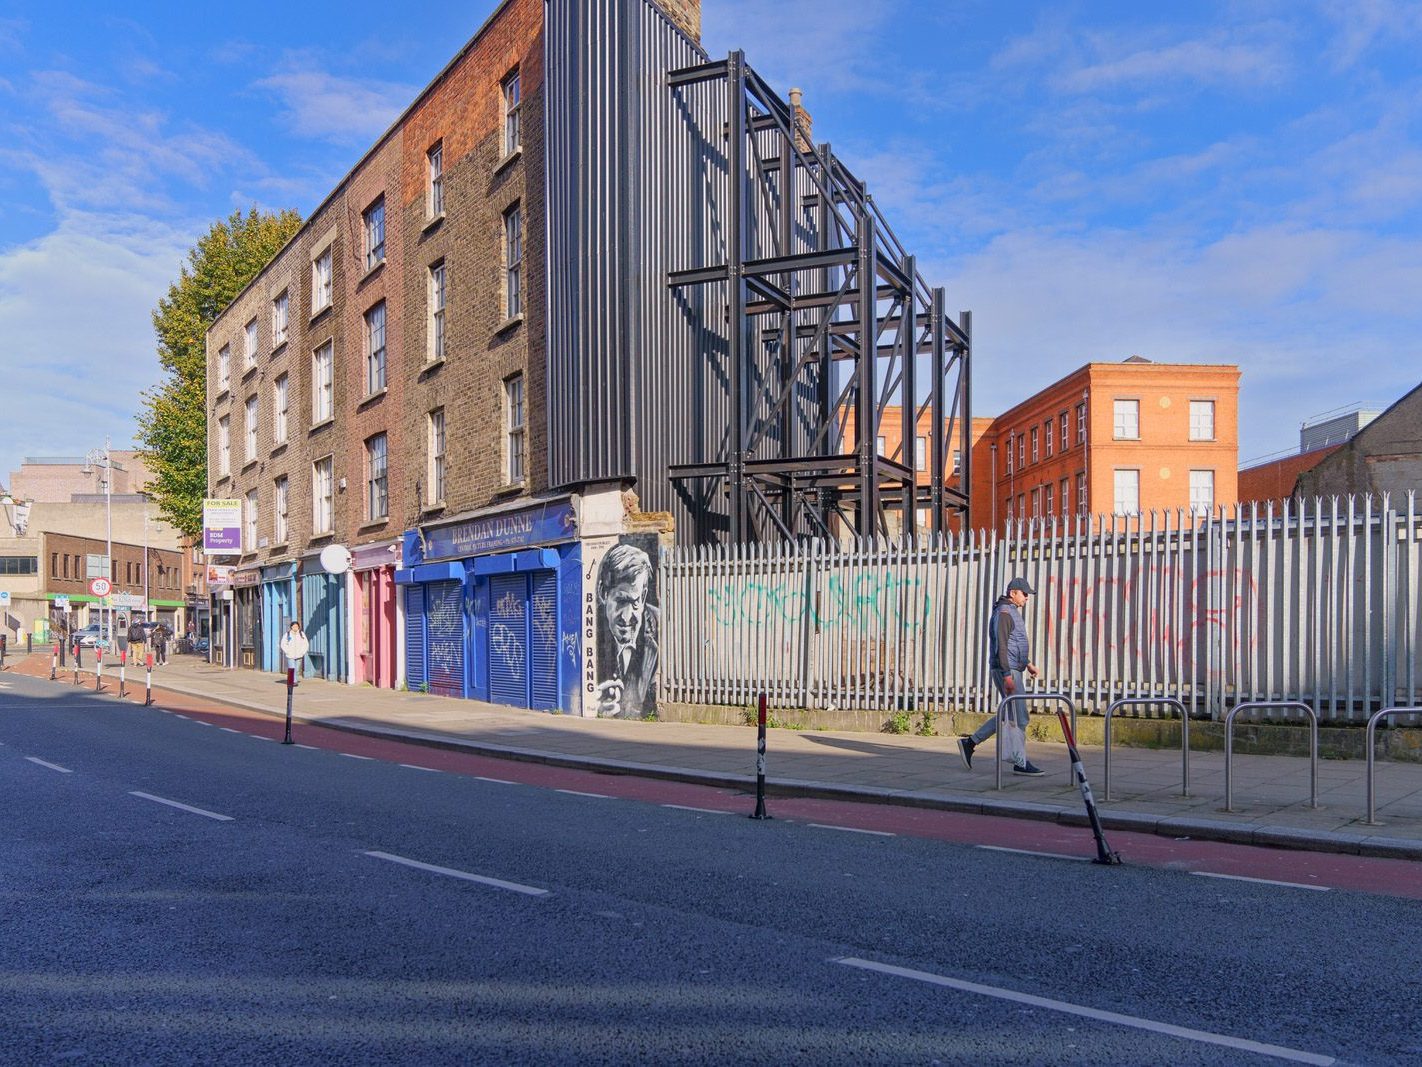 CAPEL STREET IS STILL A W.I.P. [THE PERIOD BETWEEN HALLOWEEN AND CHRISTMAS]-224774-1